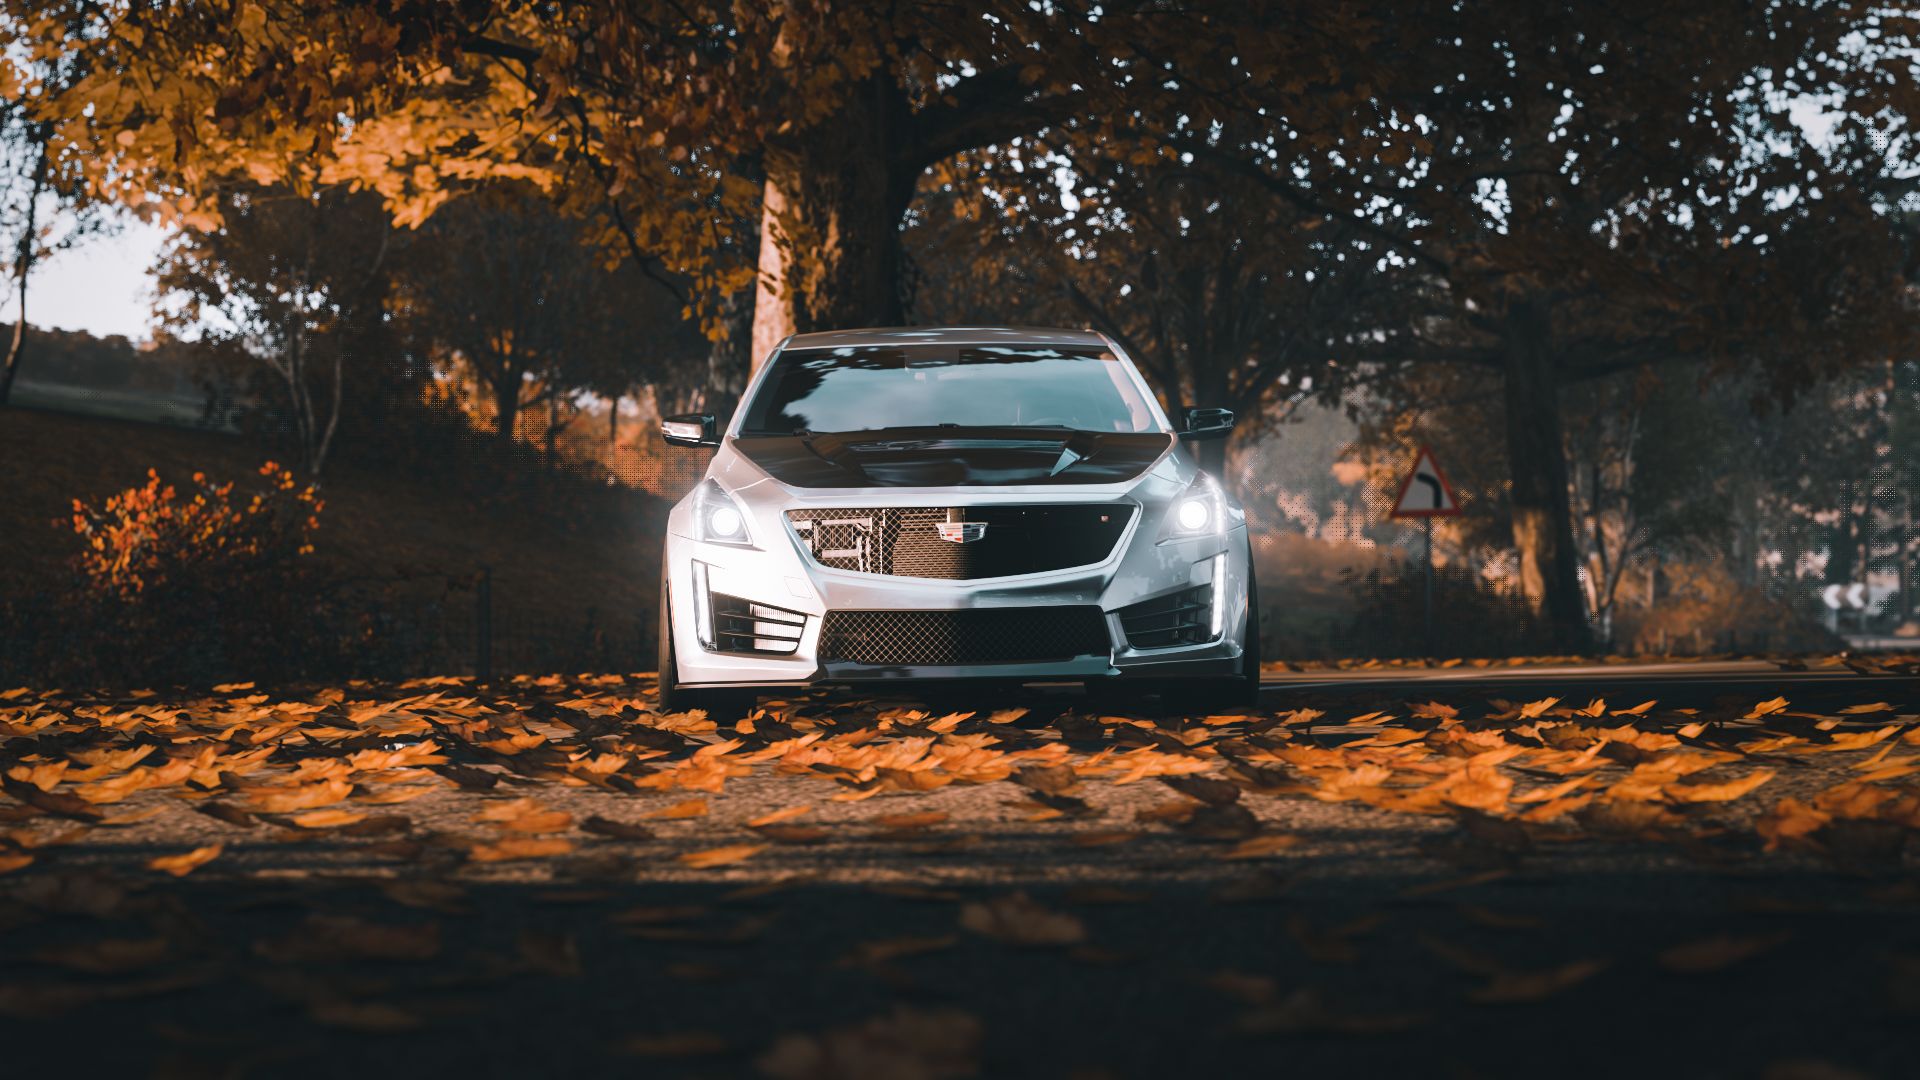 Cts V Wallpapers Wallpaper Cave